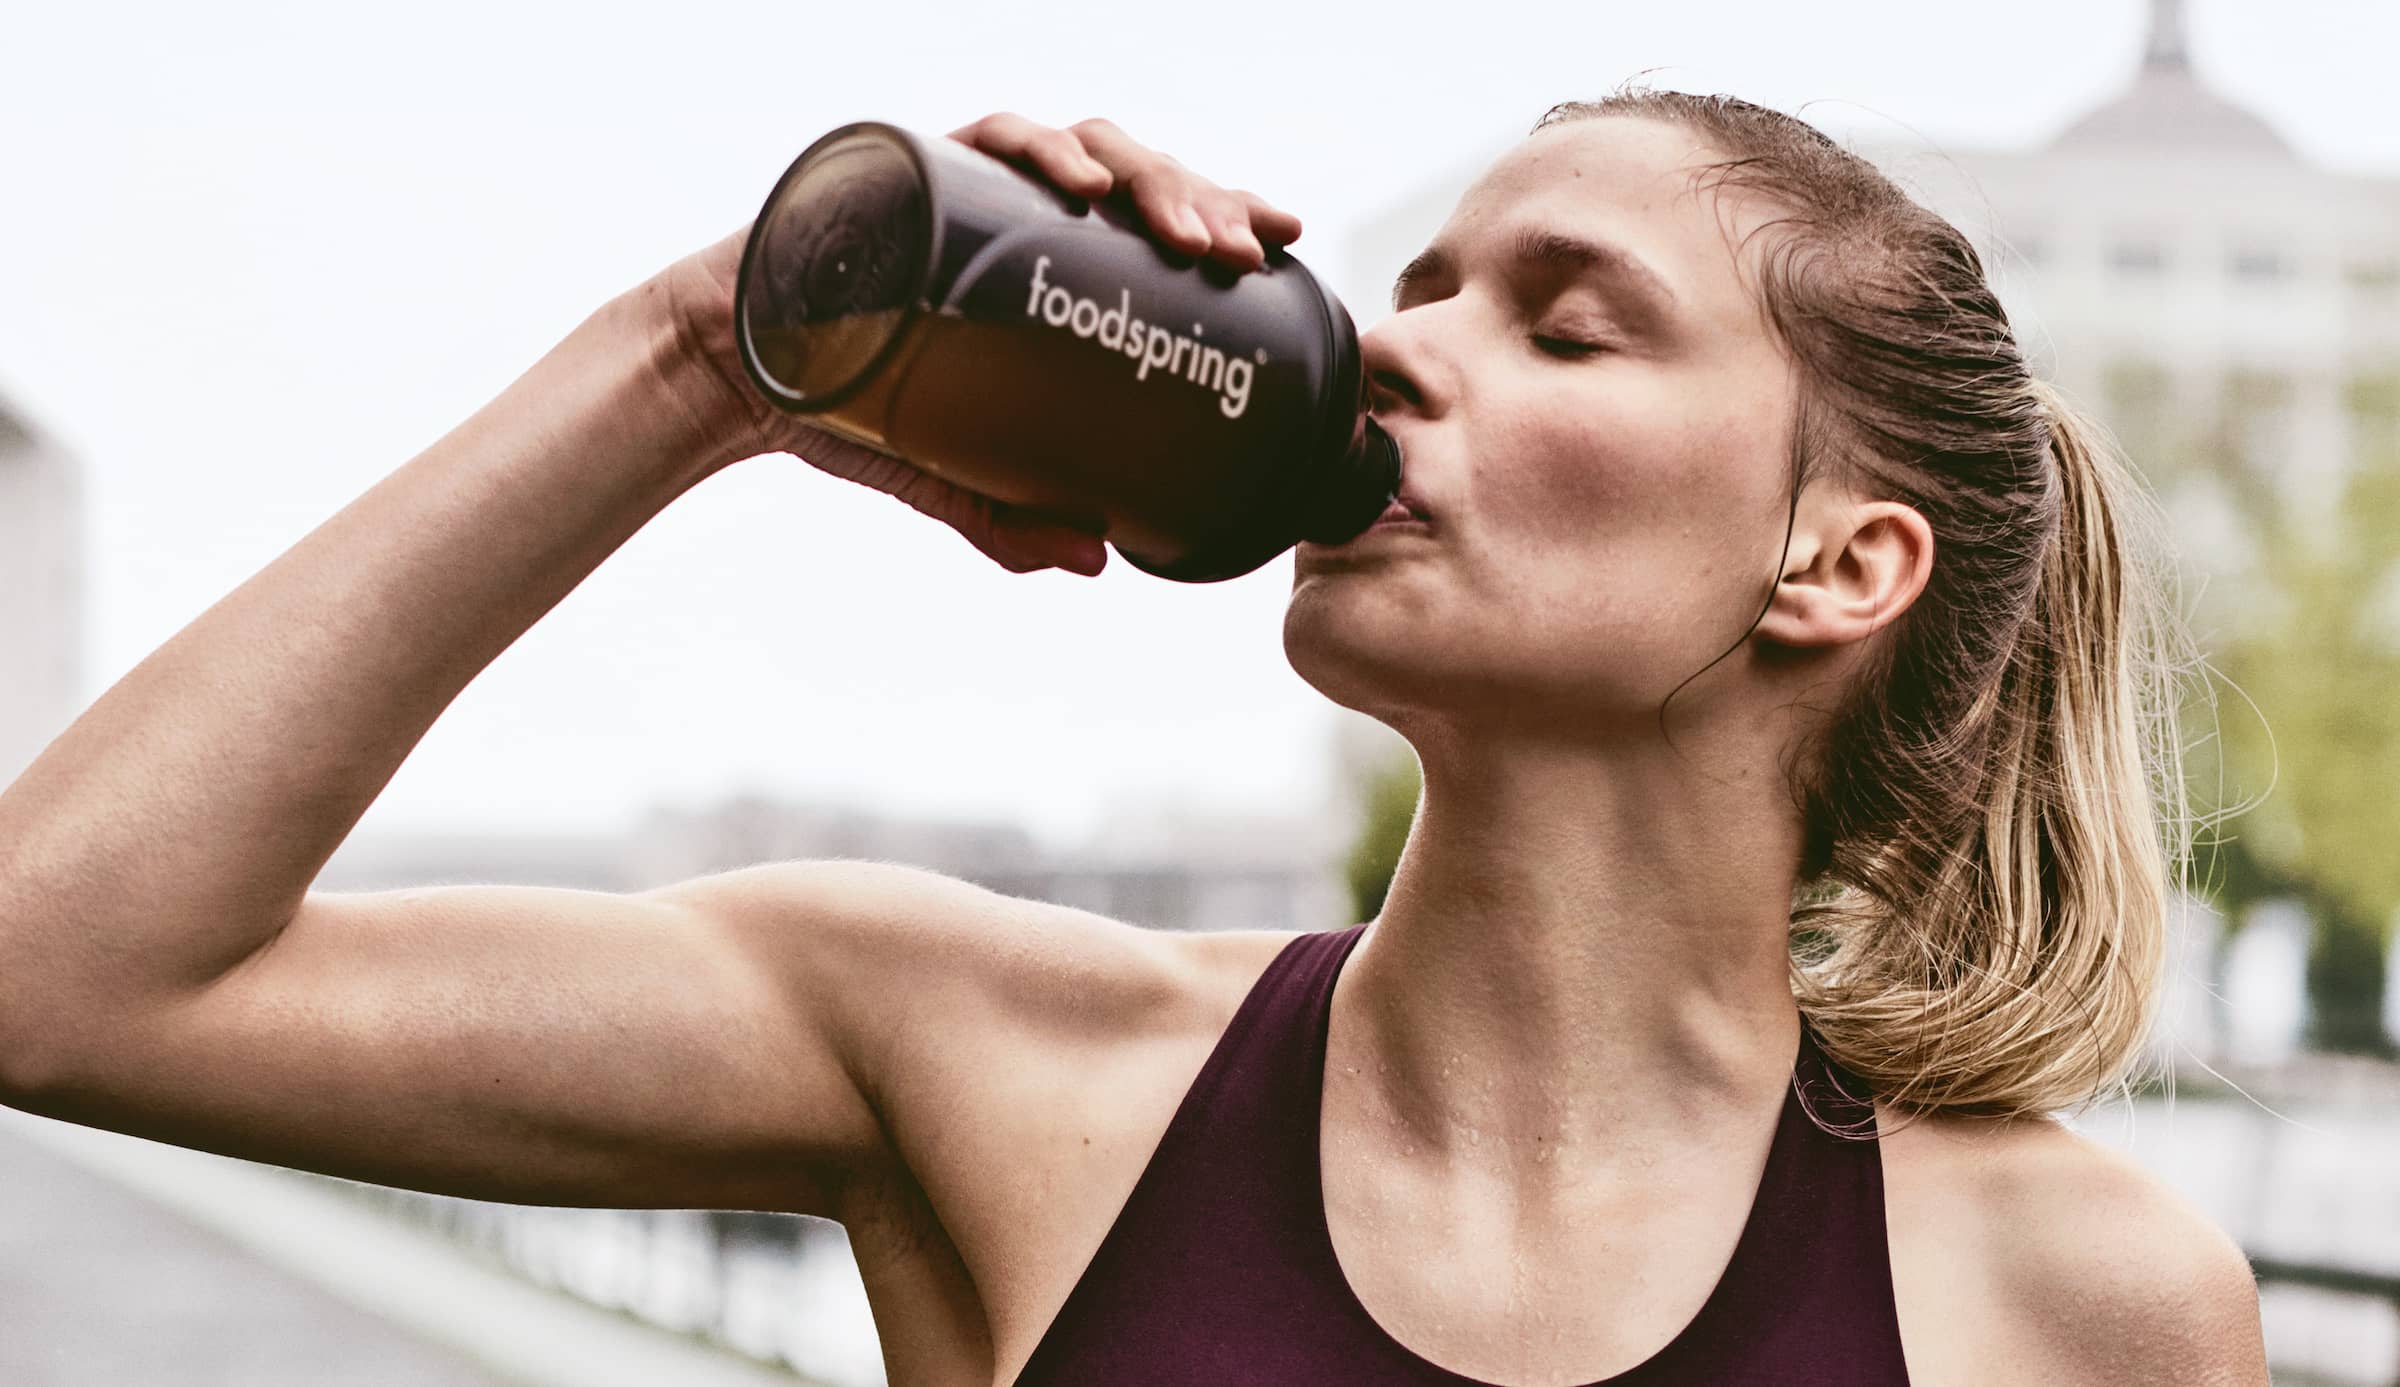 Fitness woman drinks from foodspring bottle